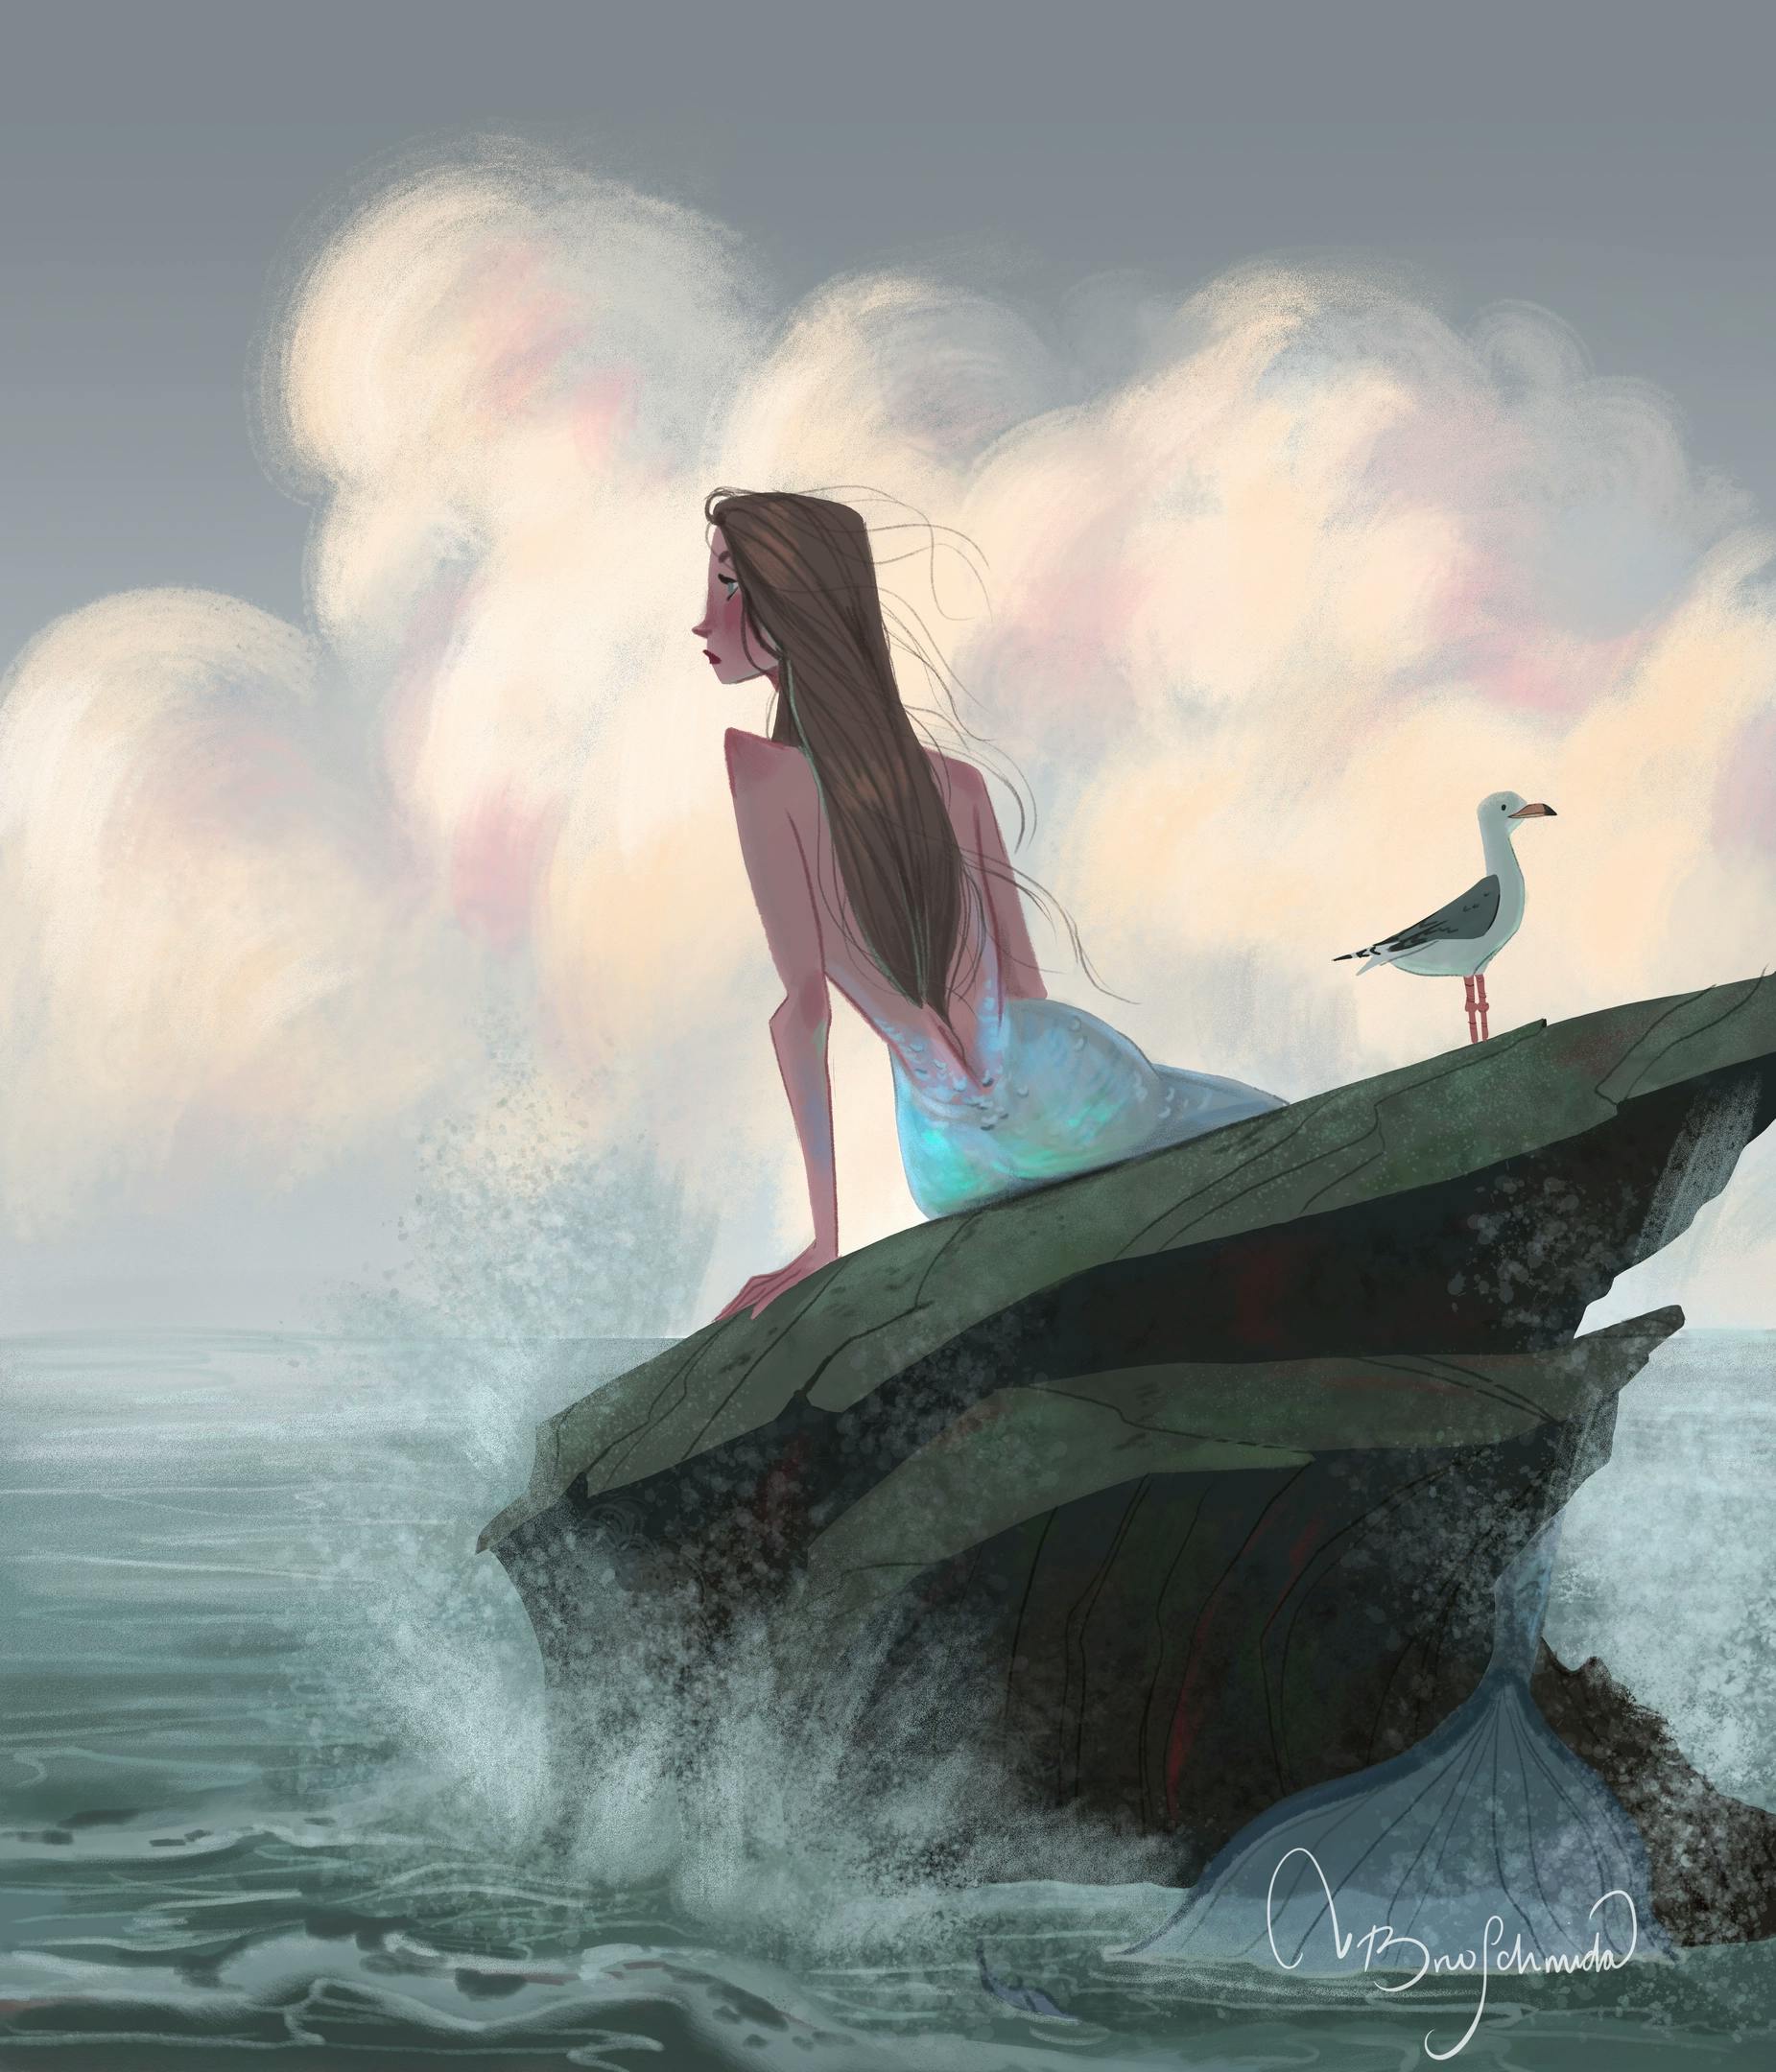 An illustration of a mermaid sitting on a rock in the ocean